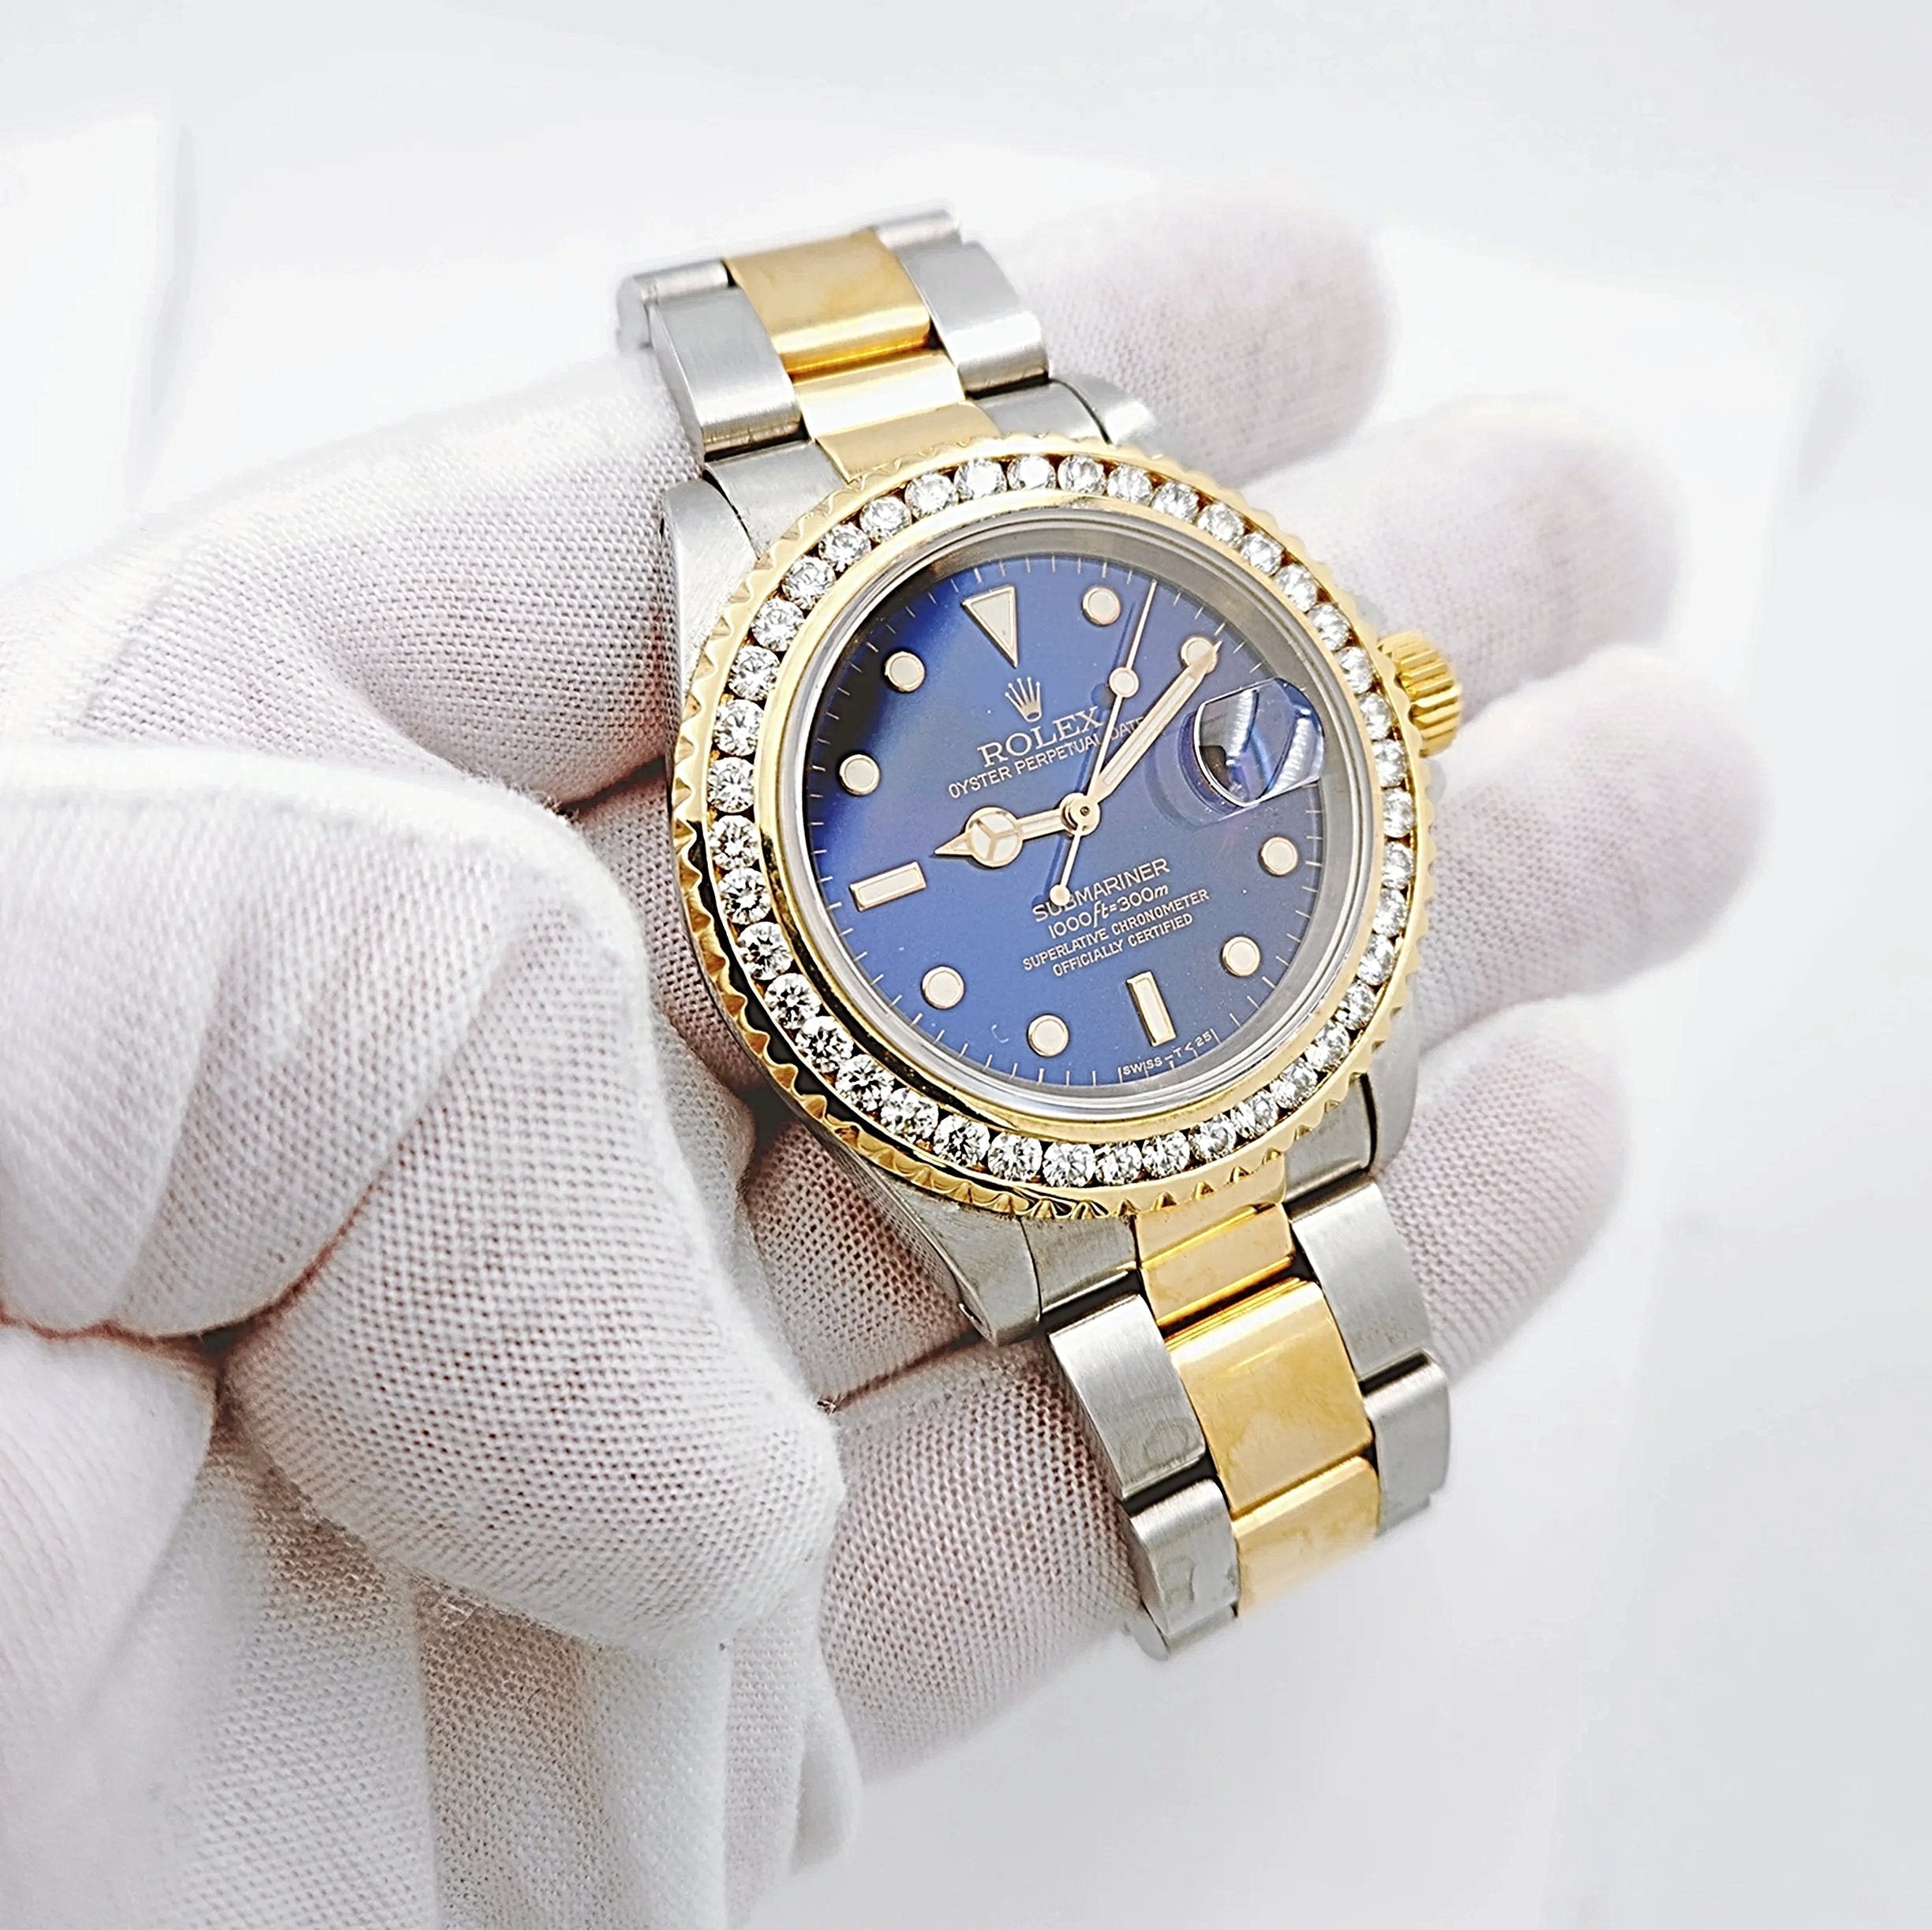 Men's Rolex 40mm Submariner 18K Yellow Gold / Stainless Steel Wristwatch w/ Blue Dial & 3CT. Diamond Bezel. (Pre-Owned)